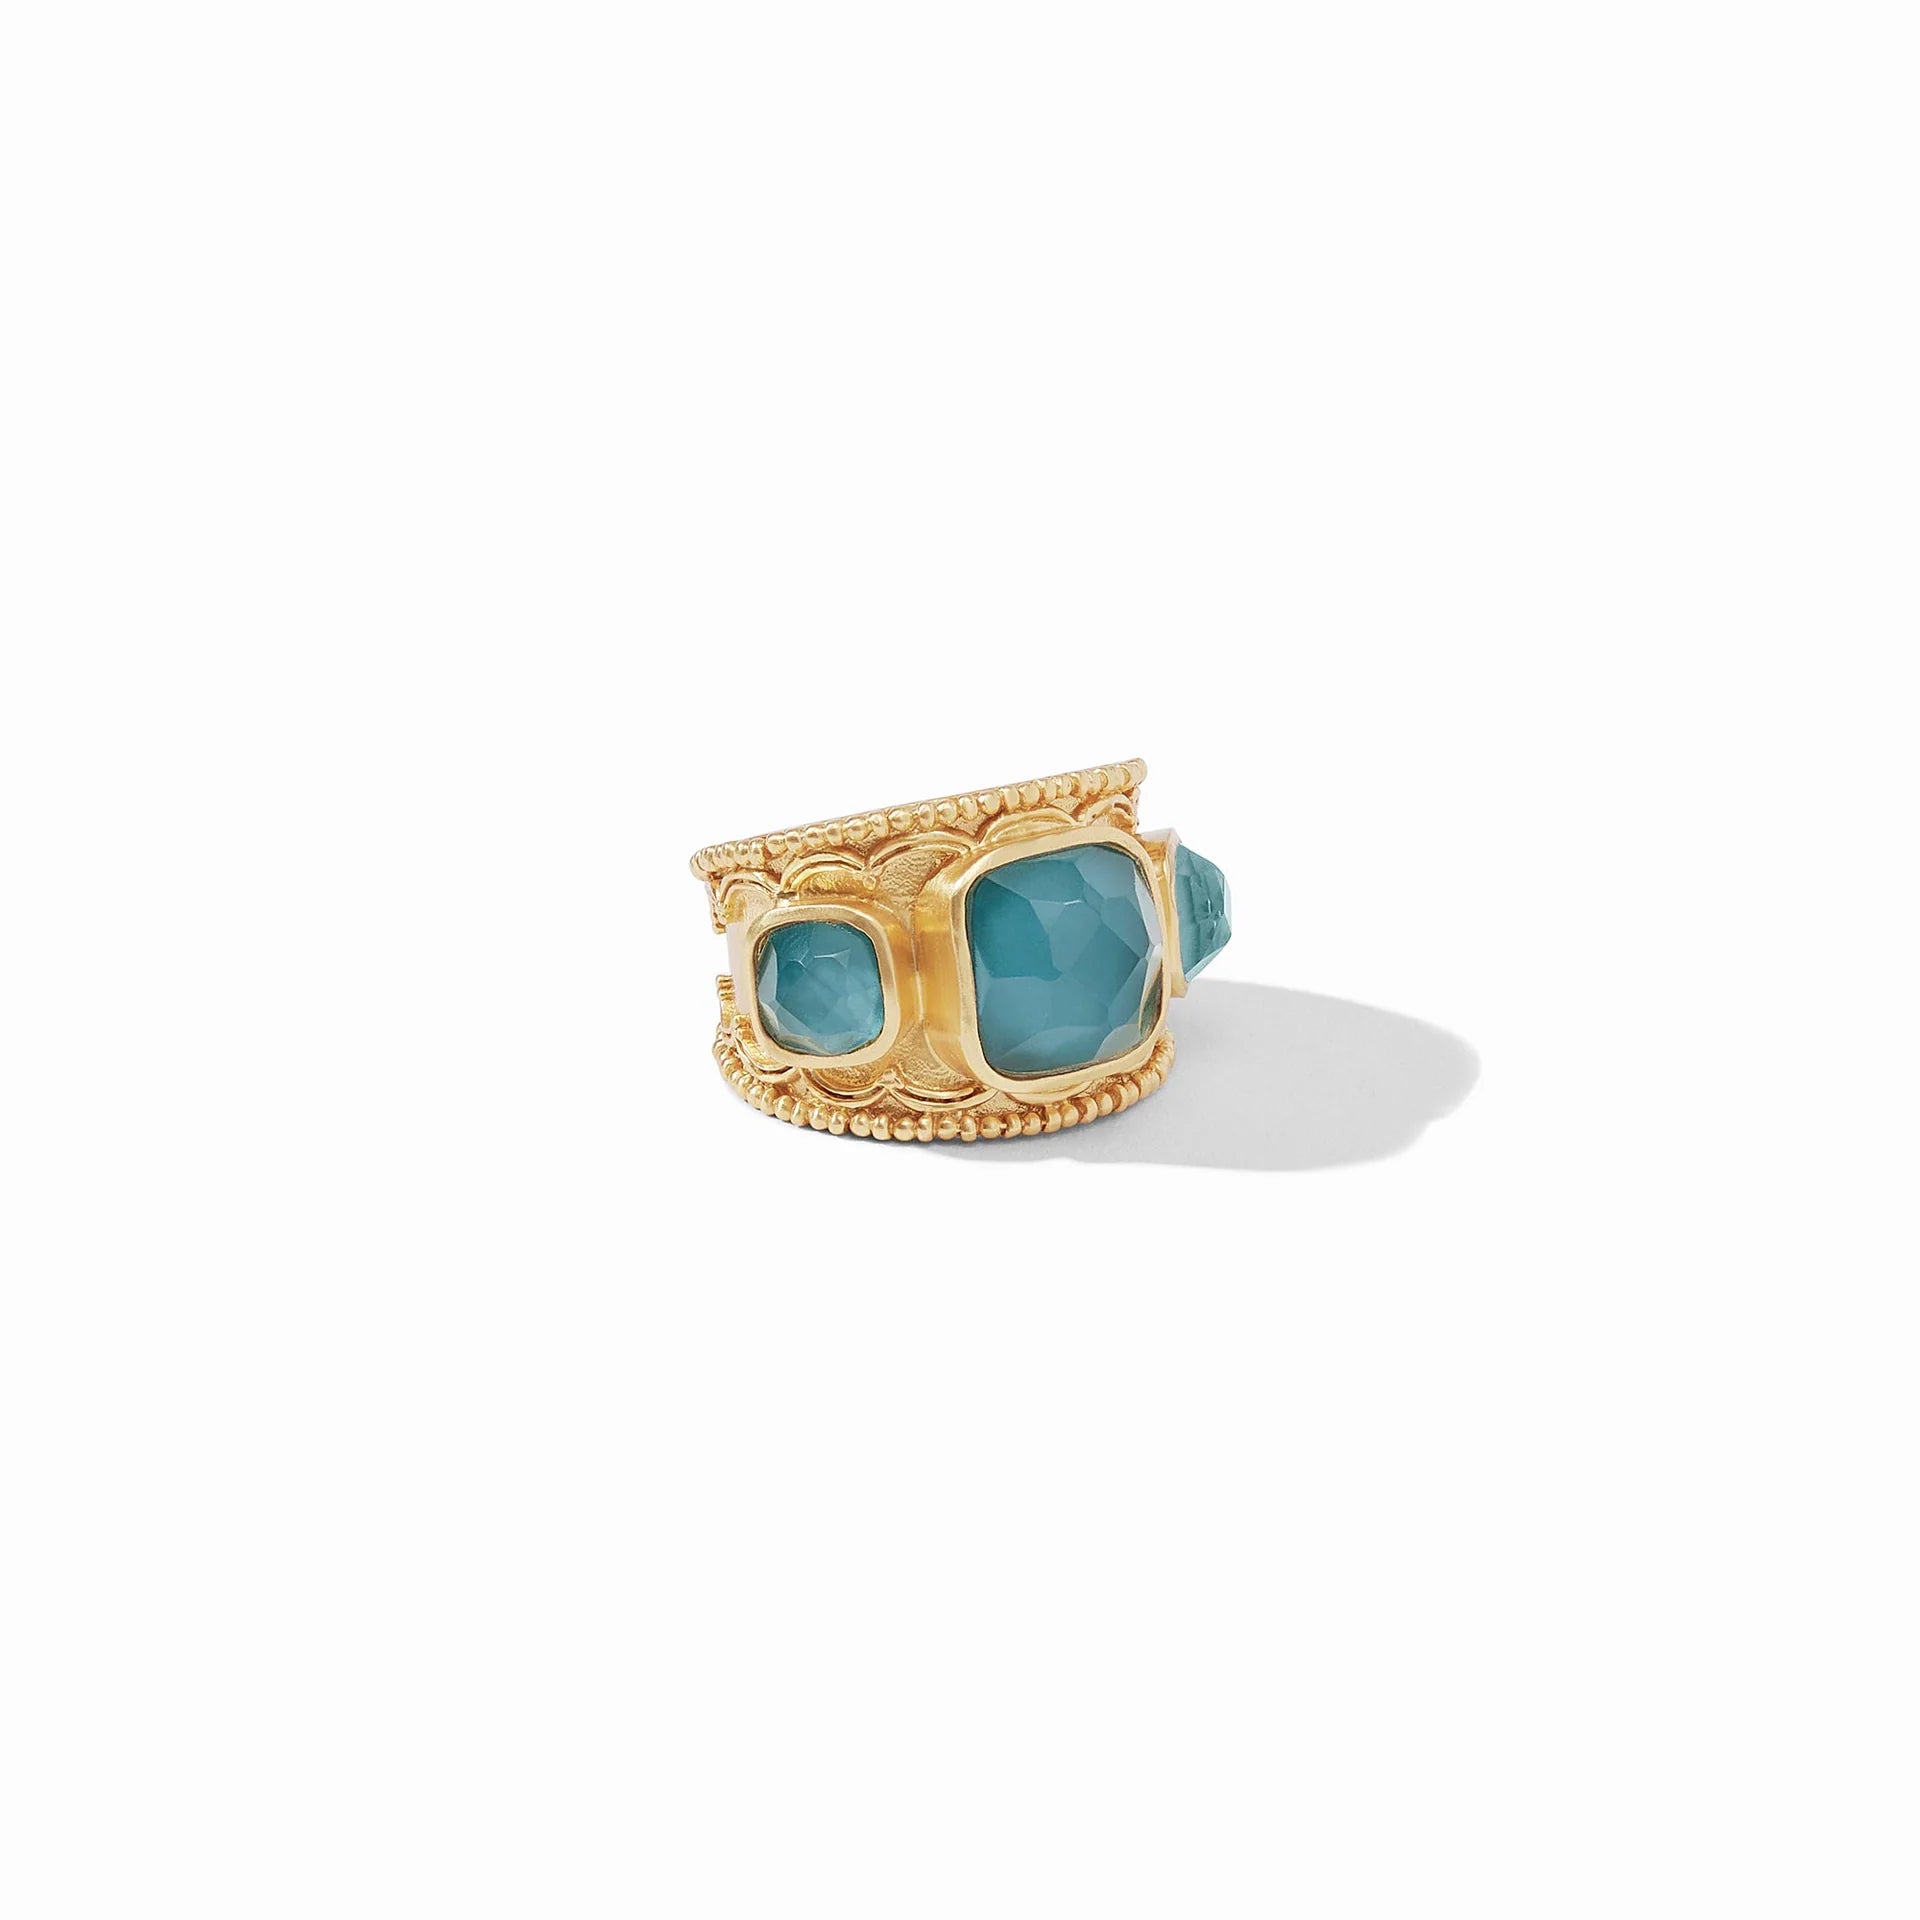 Julie Vos Trieste Statement Ring - Peacock Blue - Size 7